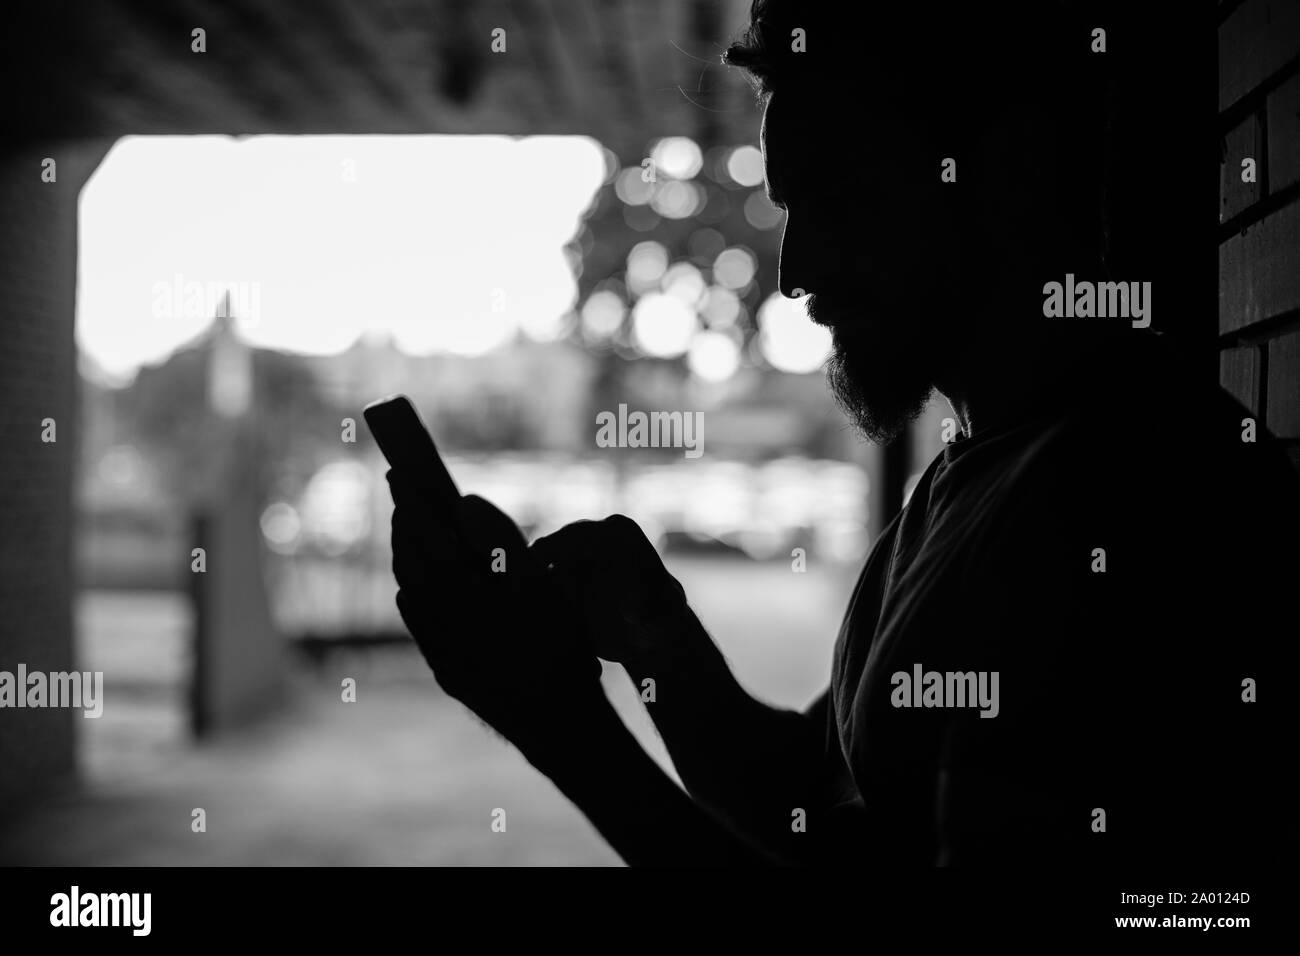 Man looking at his phone while standing in the dark passage Stock Photo